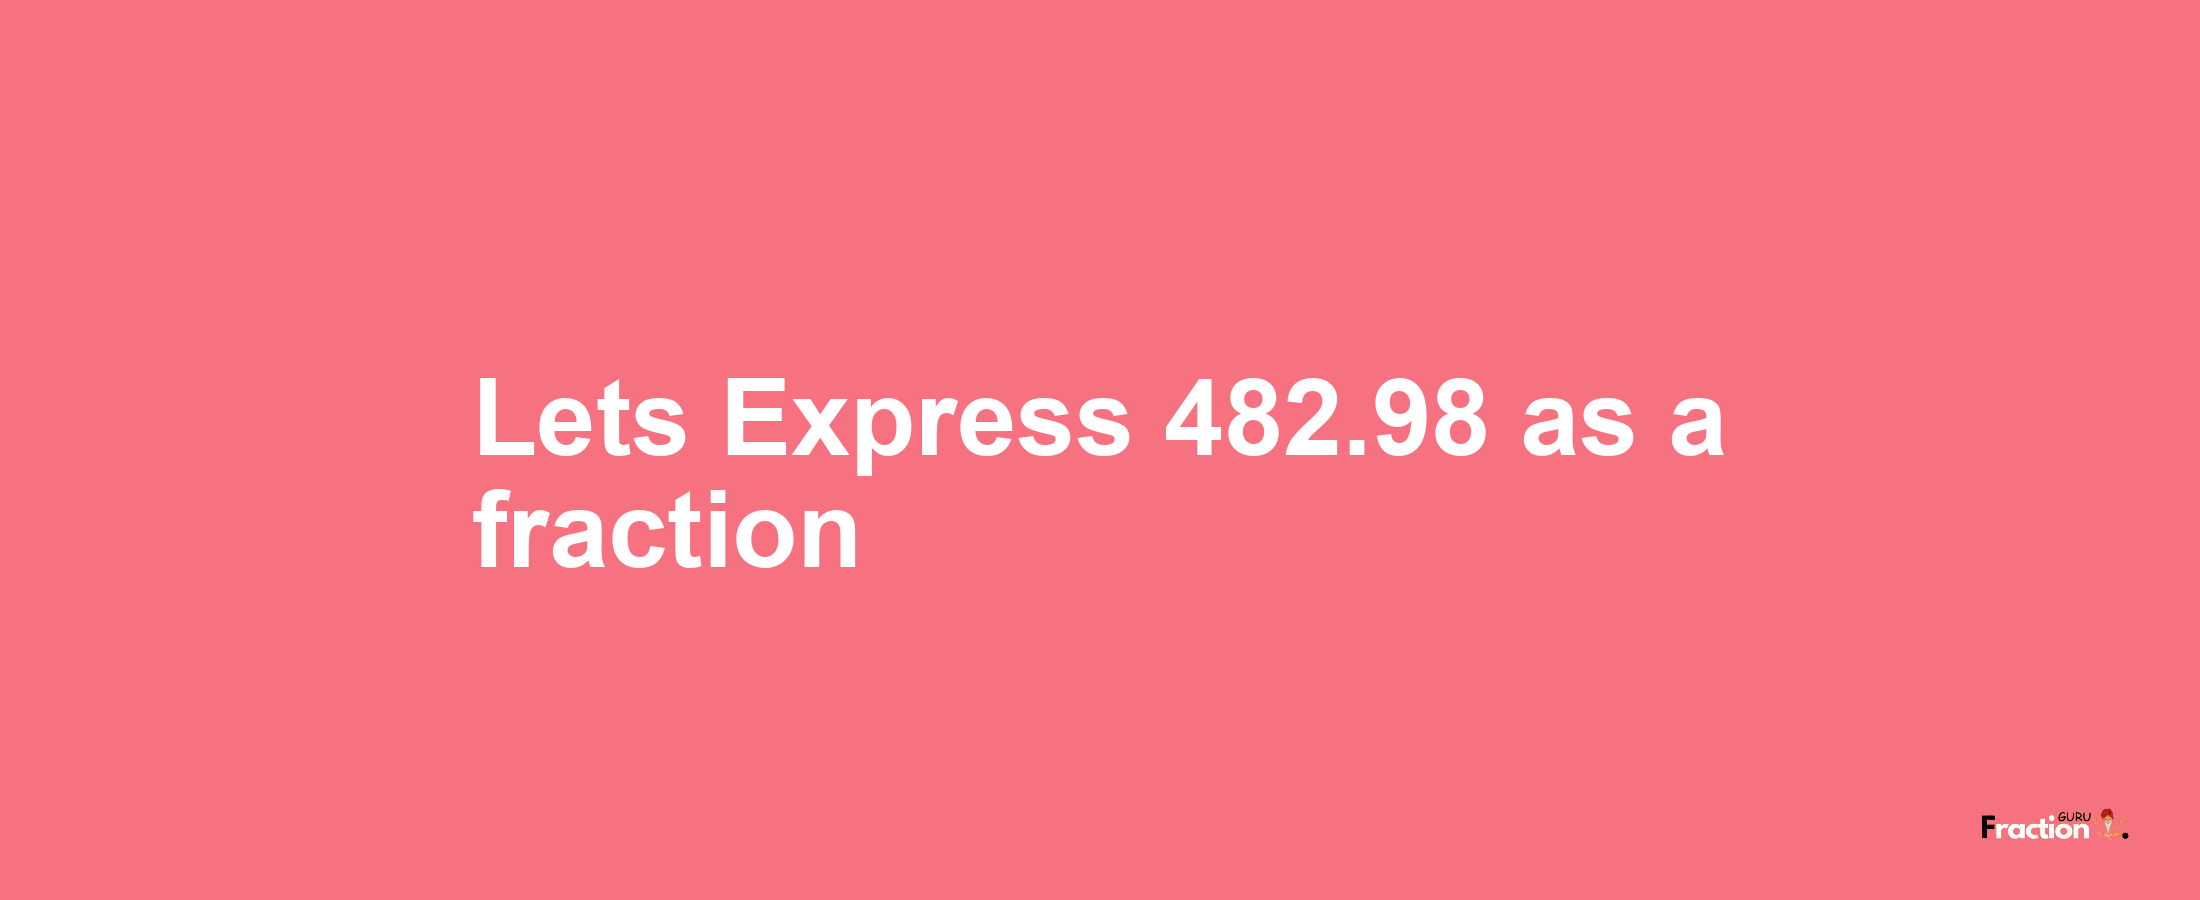 Lets Express 482.98 as afraction